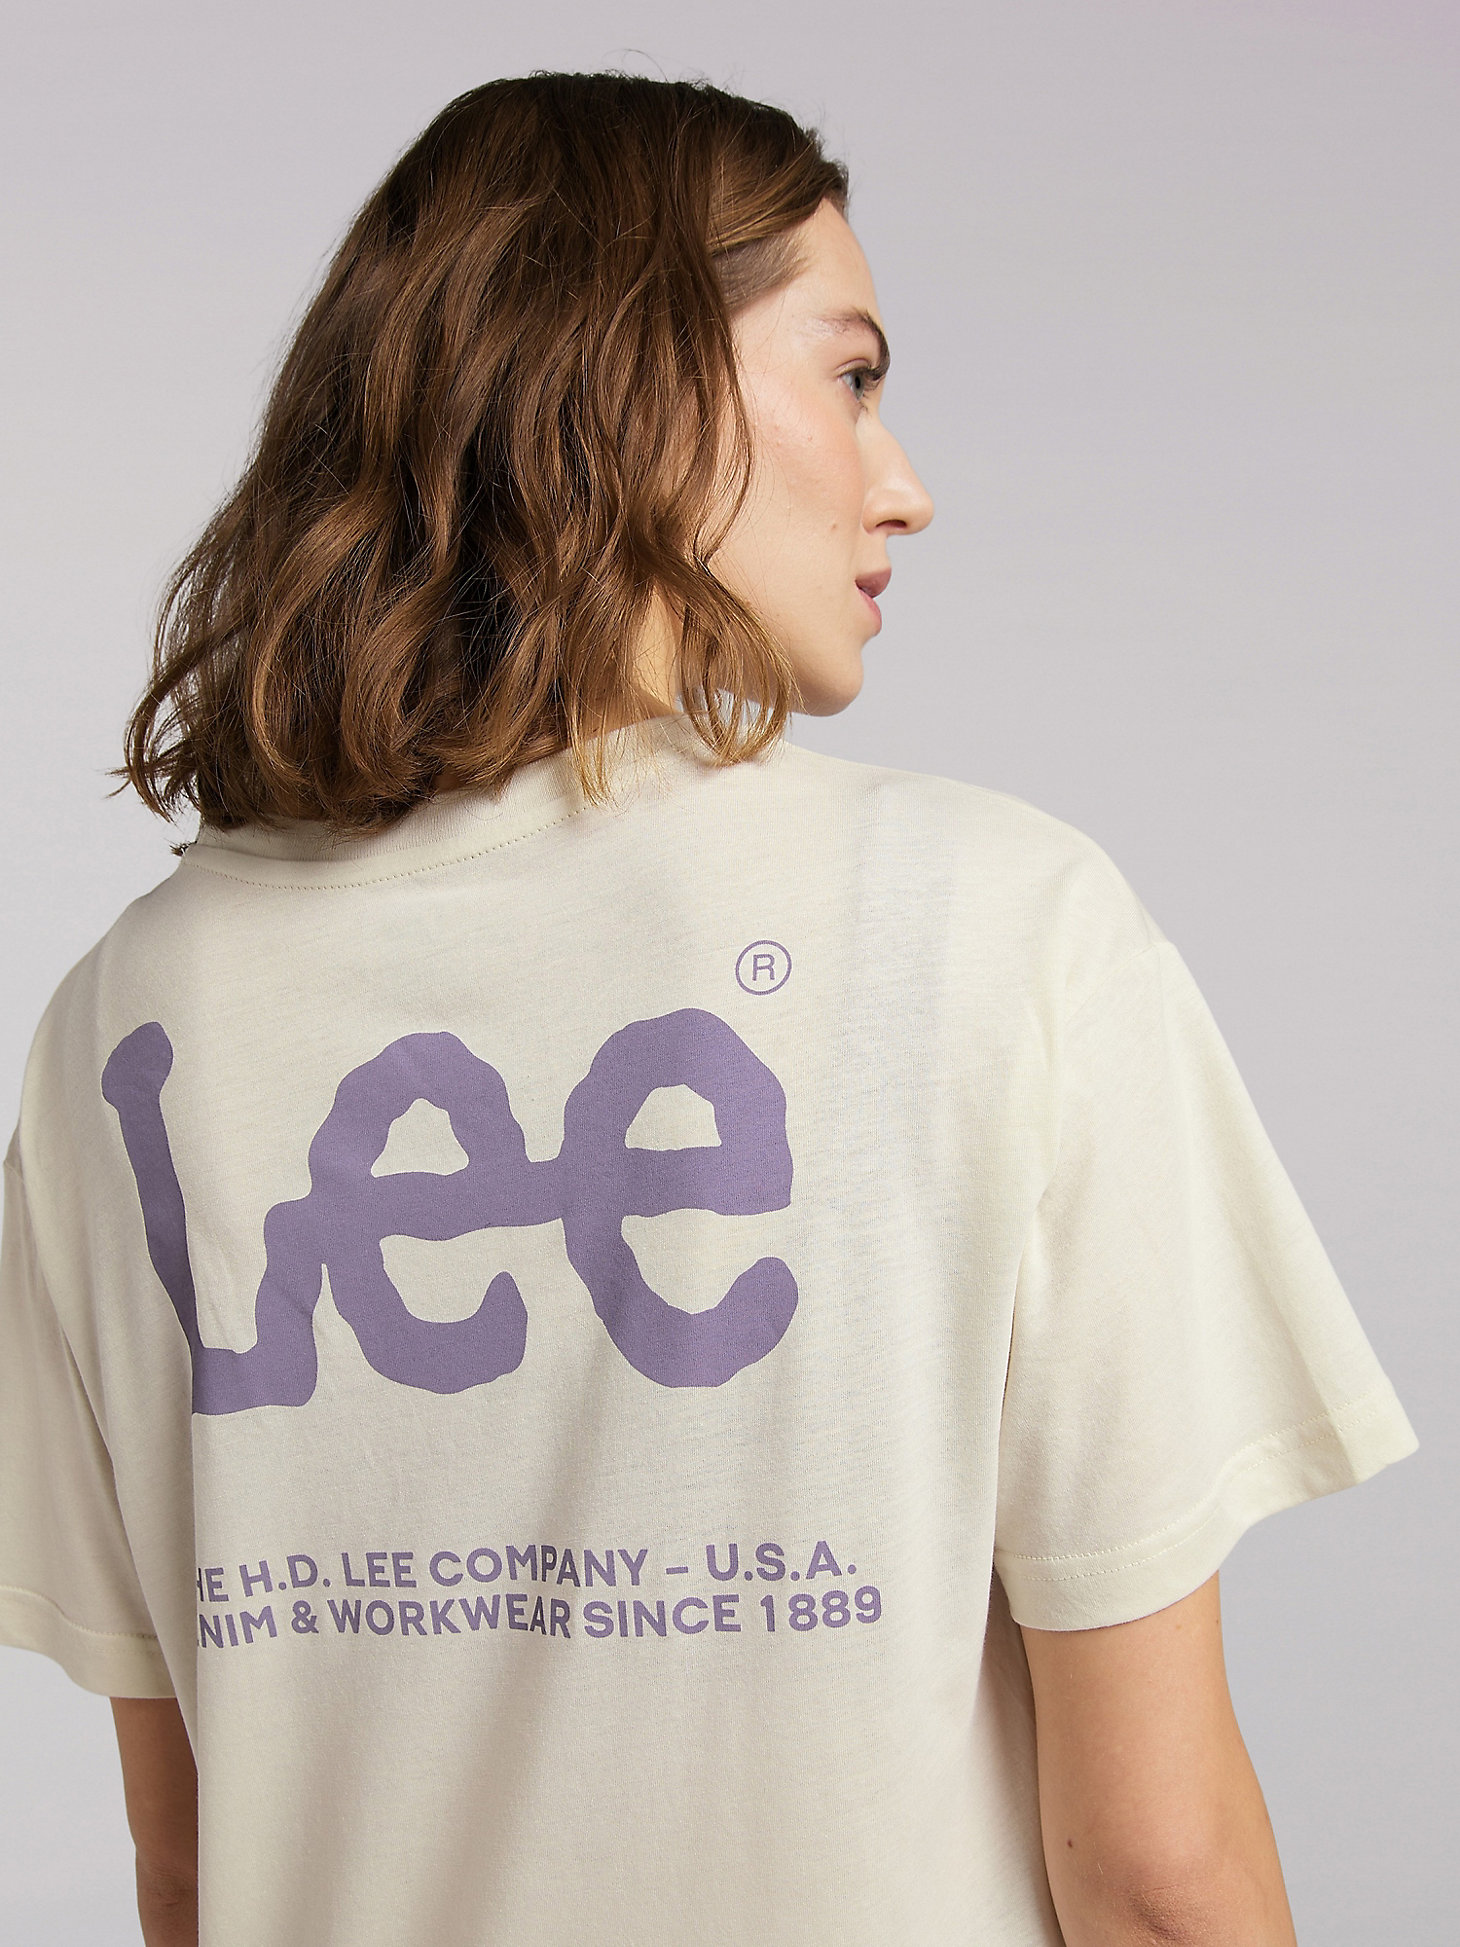 Women's Lee European Collection Relaxed Crew Tee in Workwear White alternative view 4